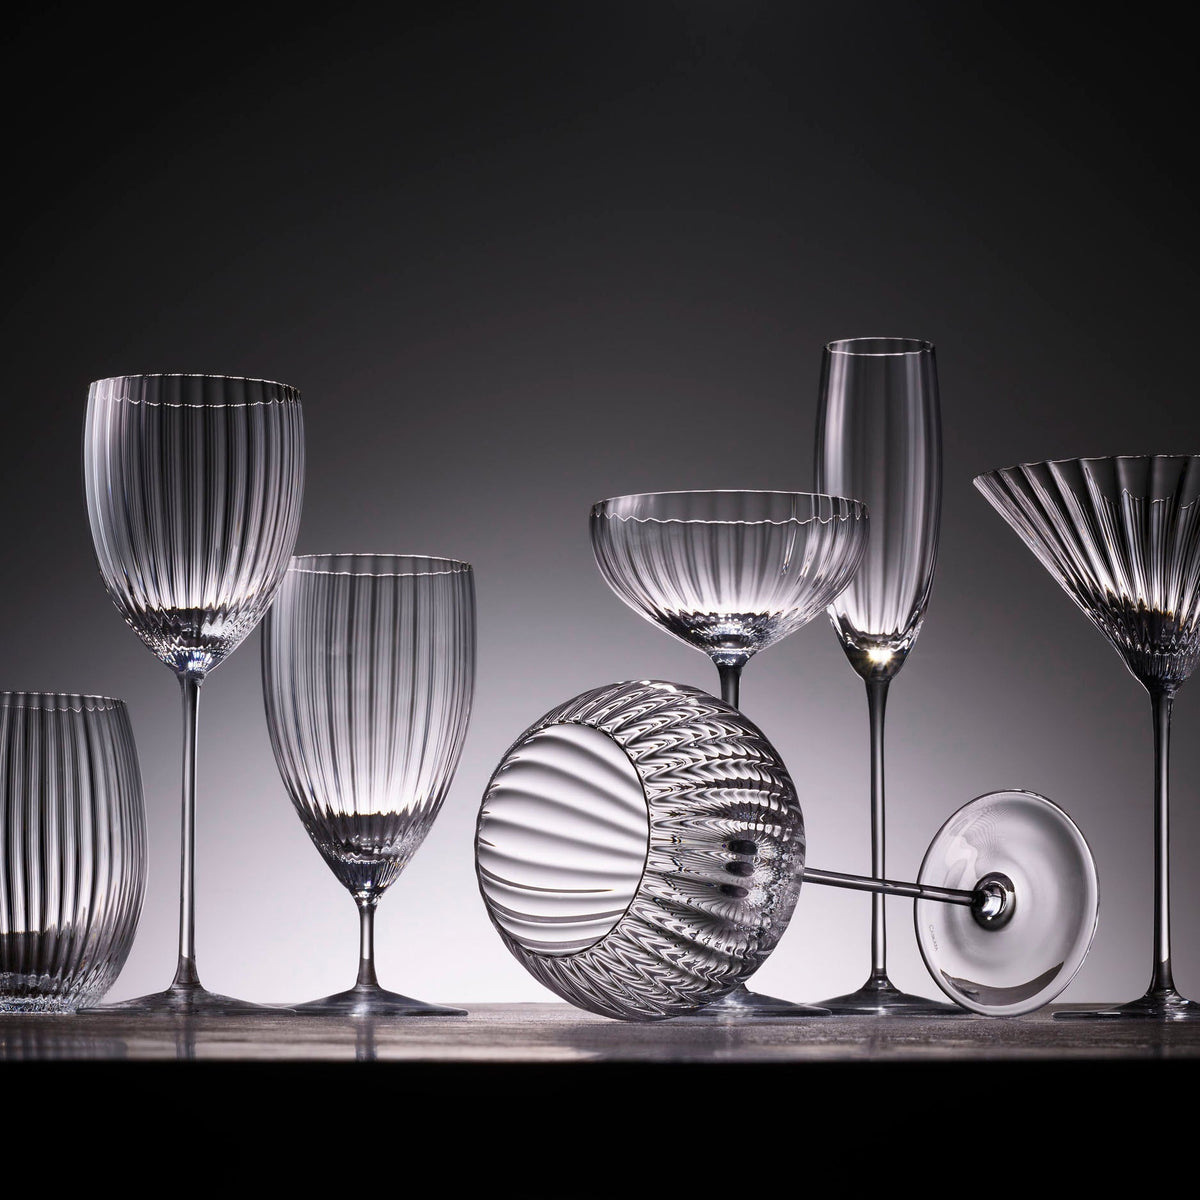 A group of Quinn Clear Everyday Glasses by Caskata Artisanal Home on a table in front of a dark background.